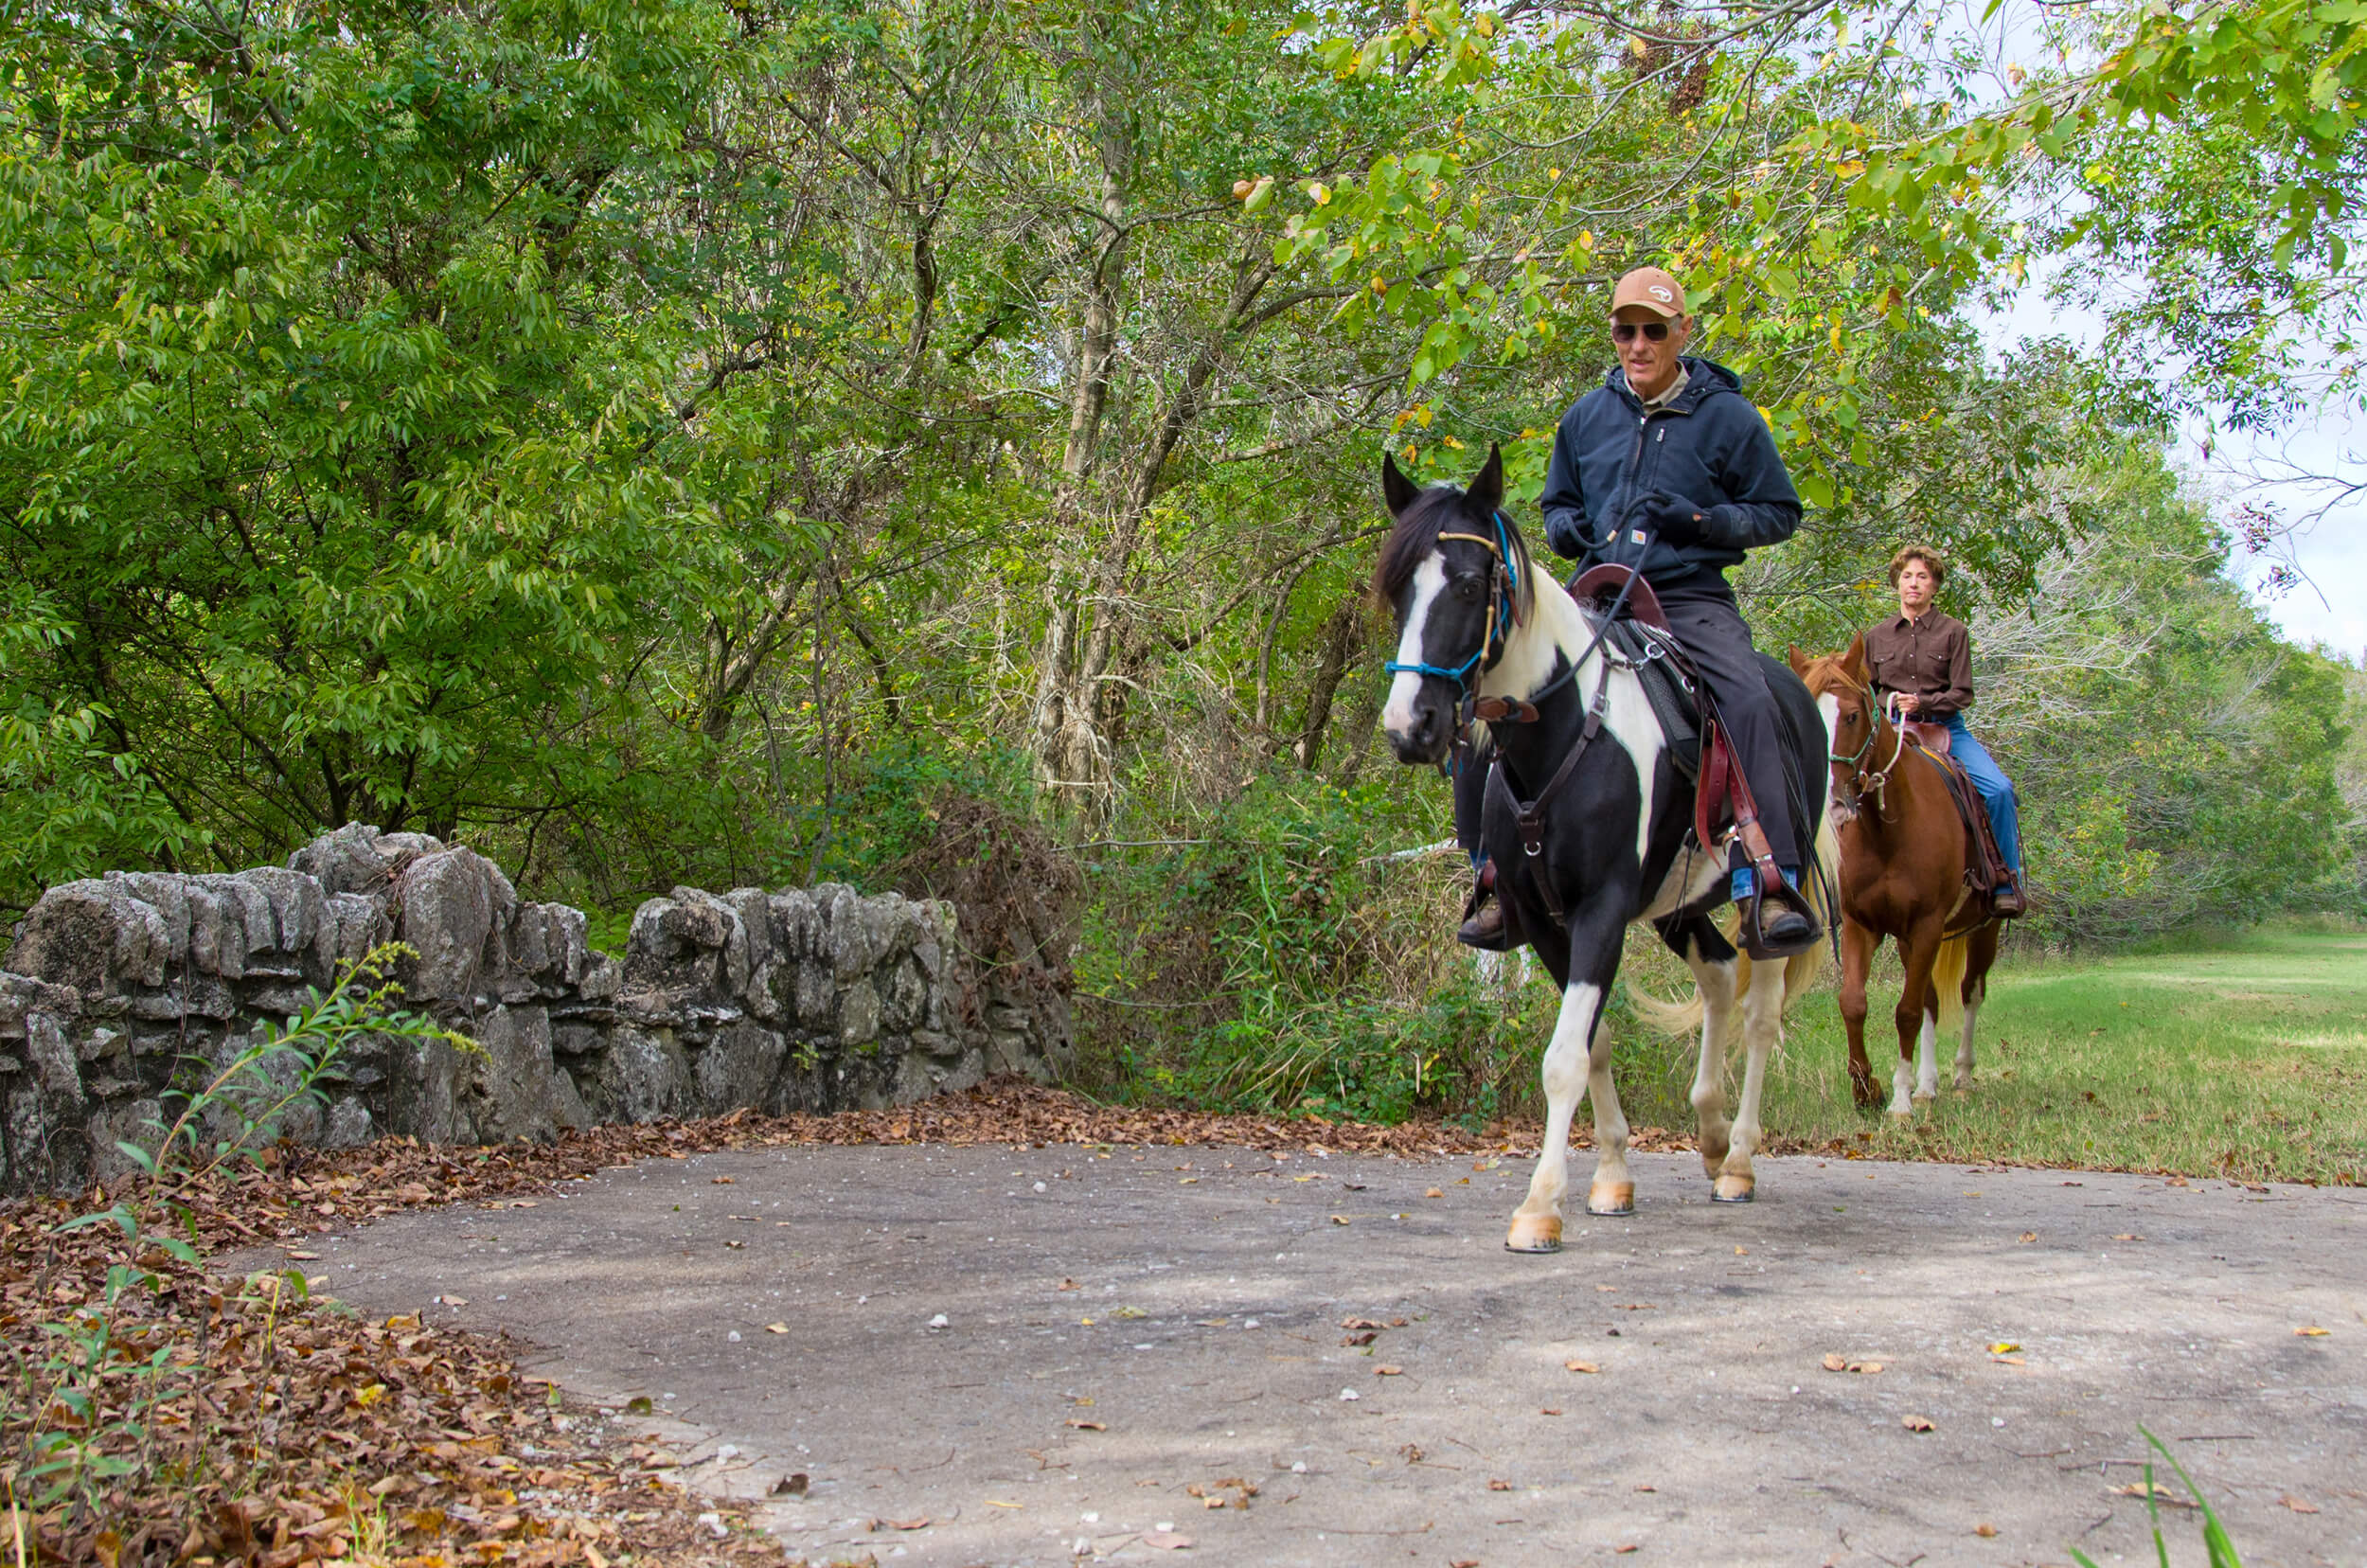 two people horseback riding in mohawk park.